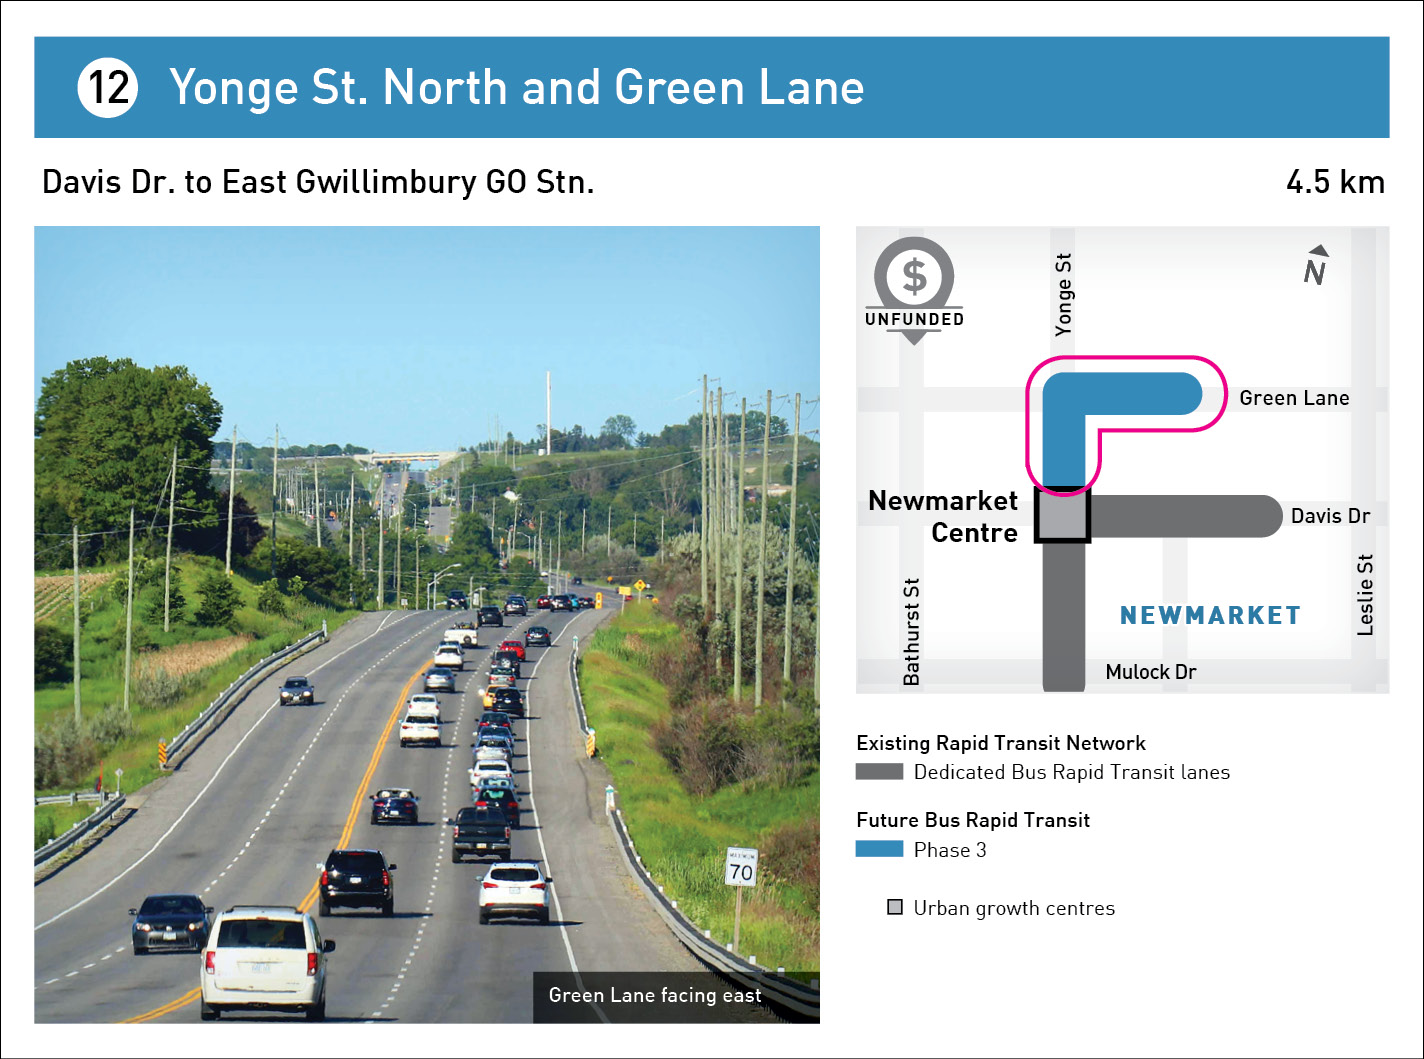 Yonge St. North and Green Lane Infographic